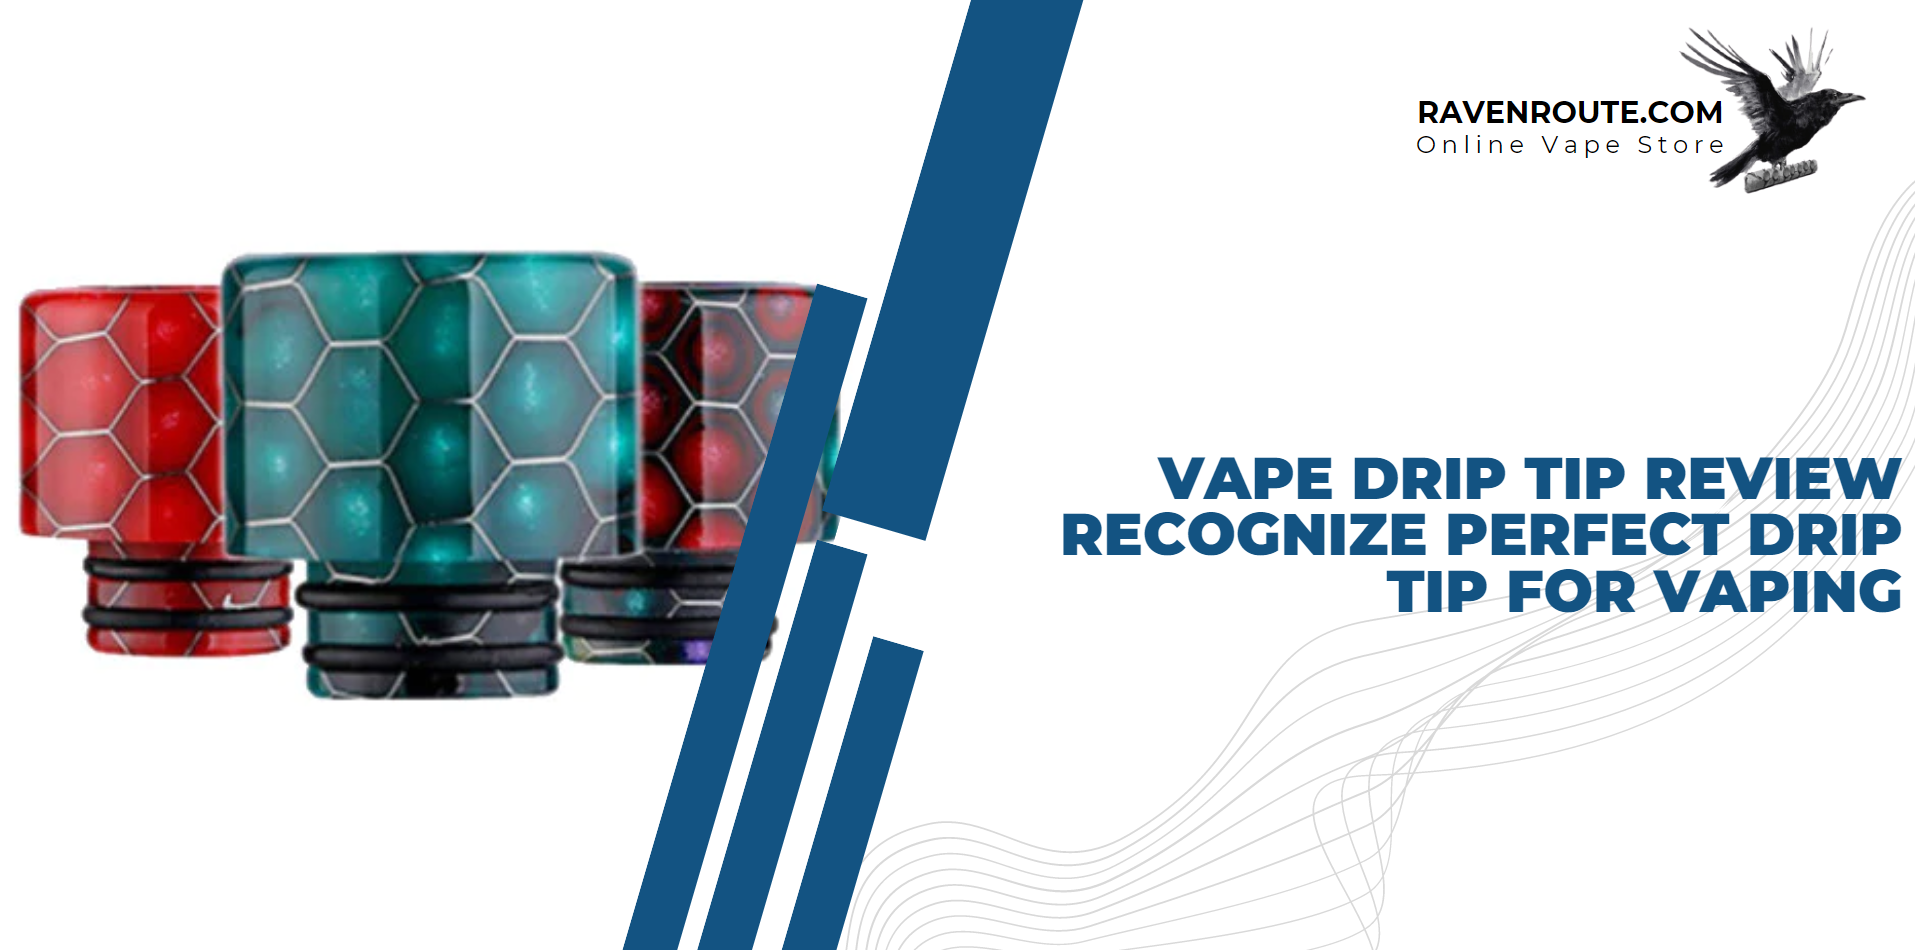 Vape Drip Tip Review - Recognize Perfect Drip Tip for Vaping